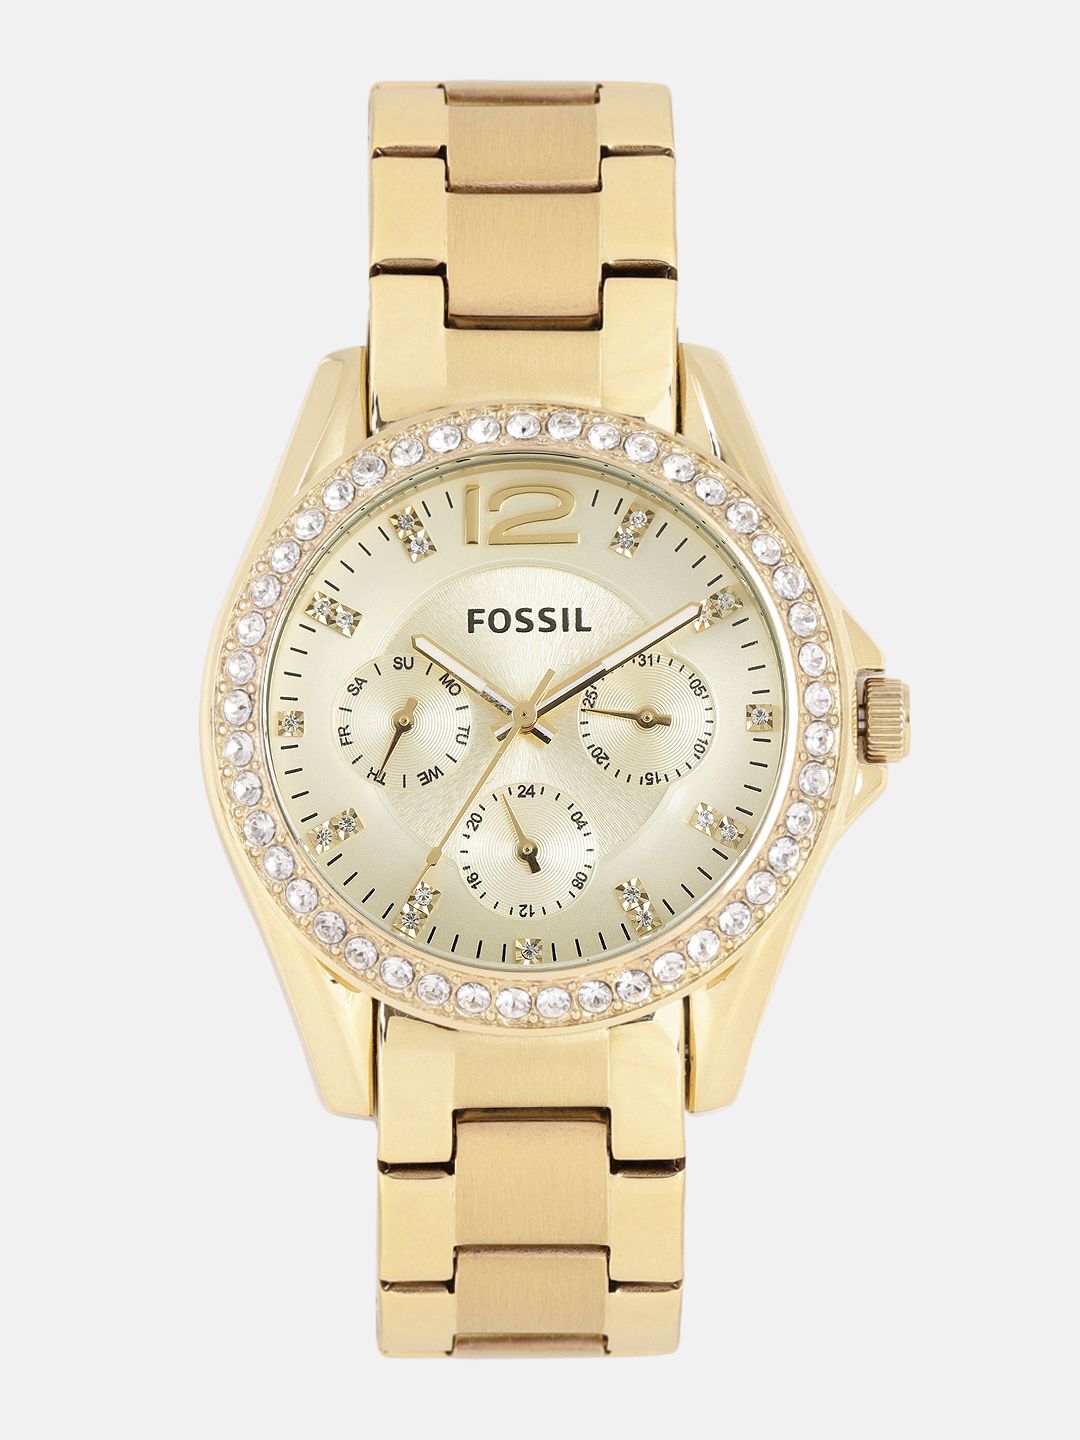 Fossil Women Gold-Toned Analogue Watch ES3203 Price in India